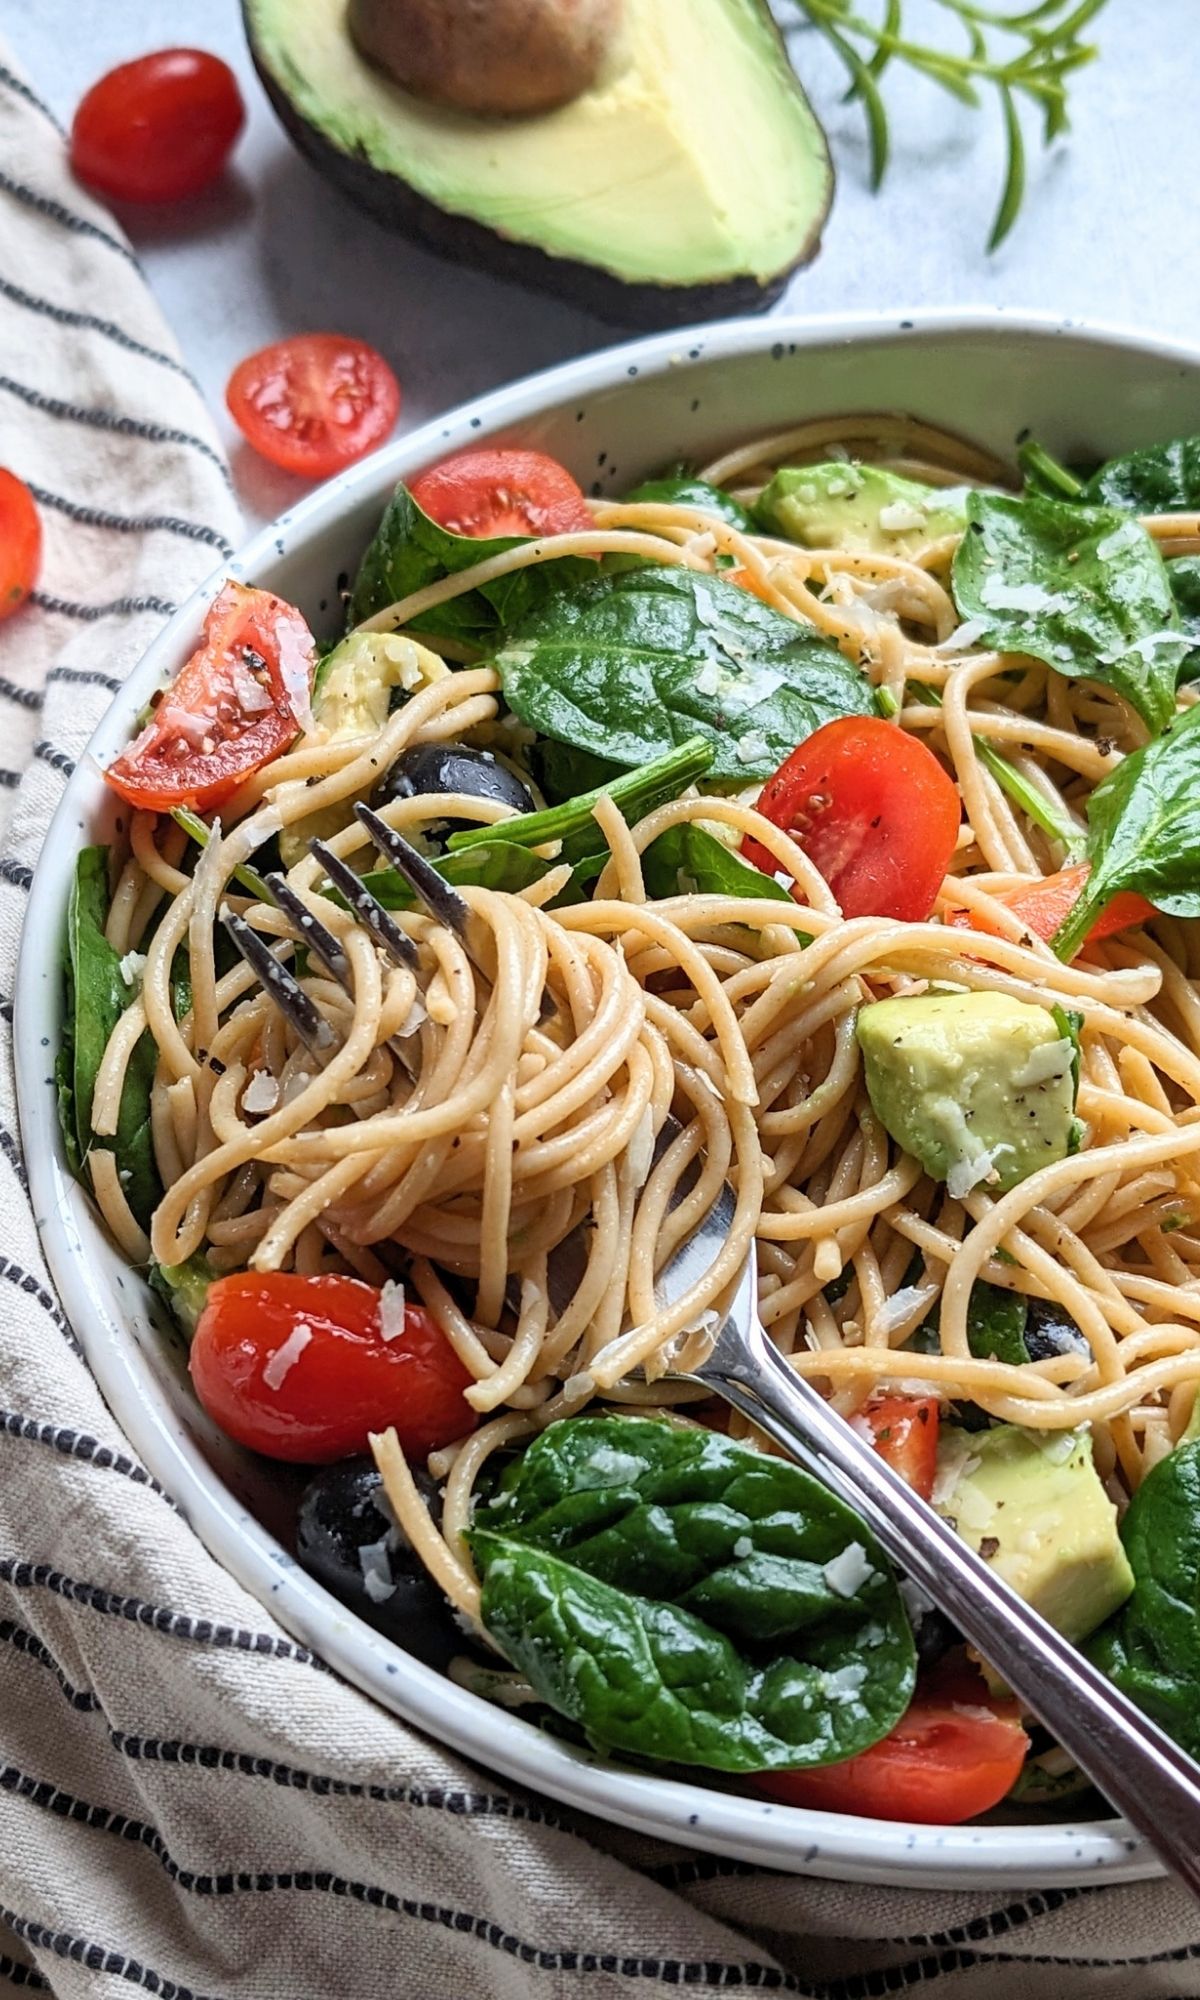 easy spaghetti salad with avocado and olives vegetarian recipes easy vegan pasta salad alternatives healthy pasta salad with American and Californian ingredients